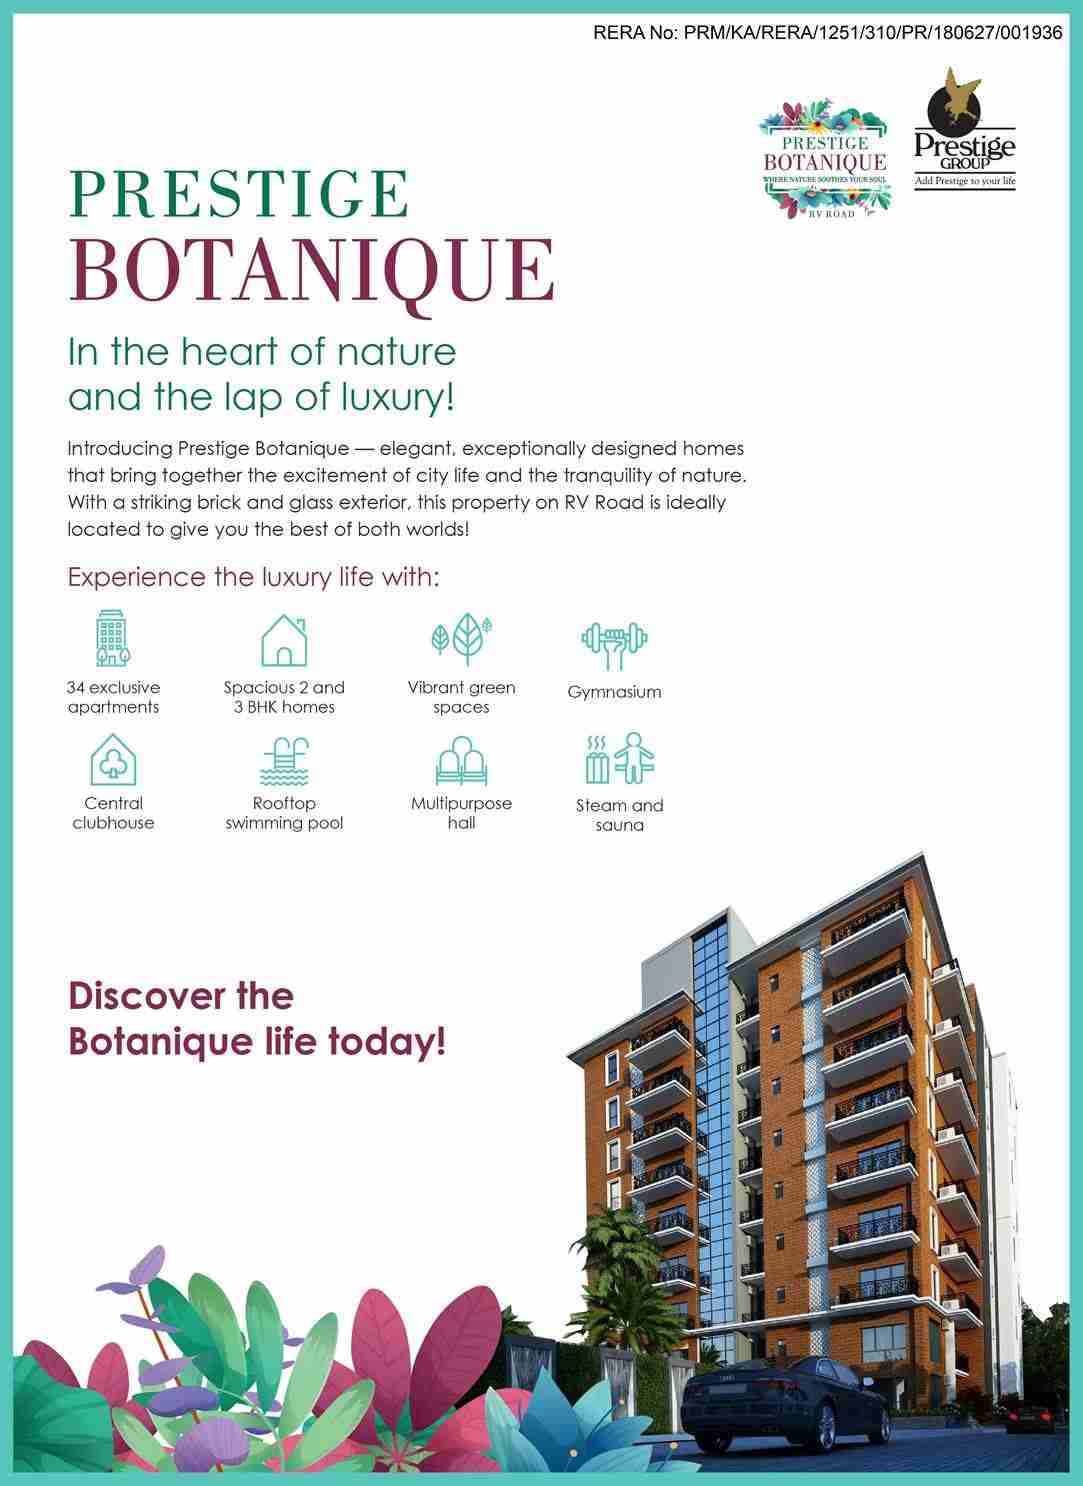 Live in the heart of nature and the lap of luxury at Prestige Botanique in Bangalore